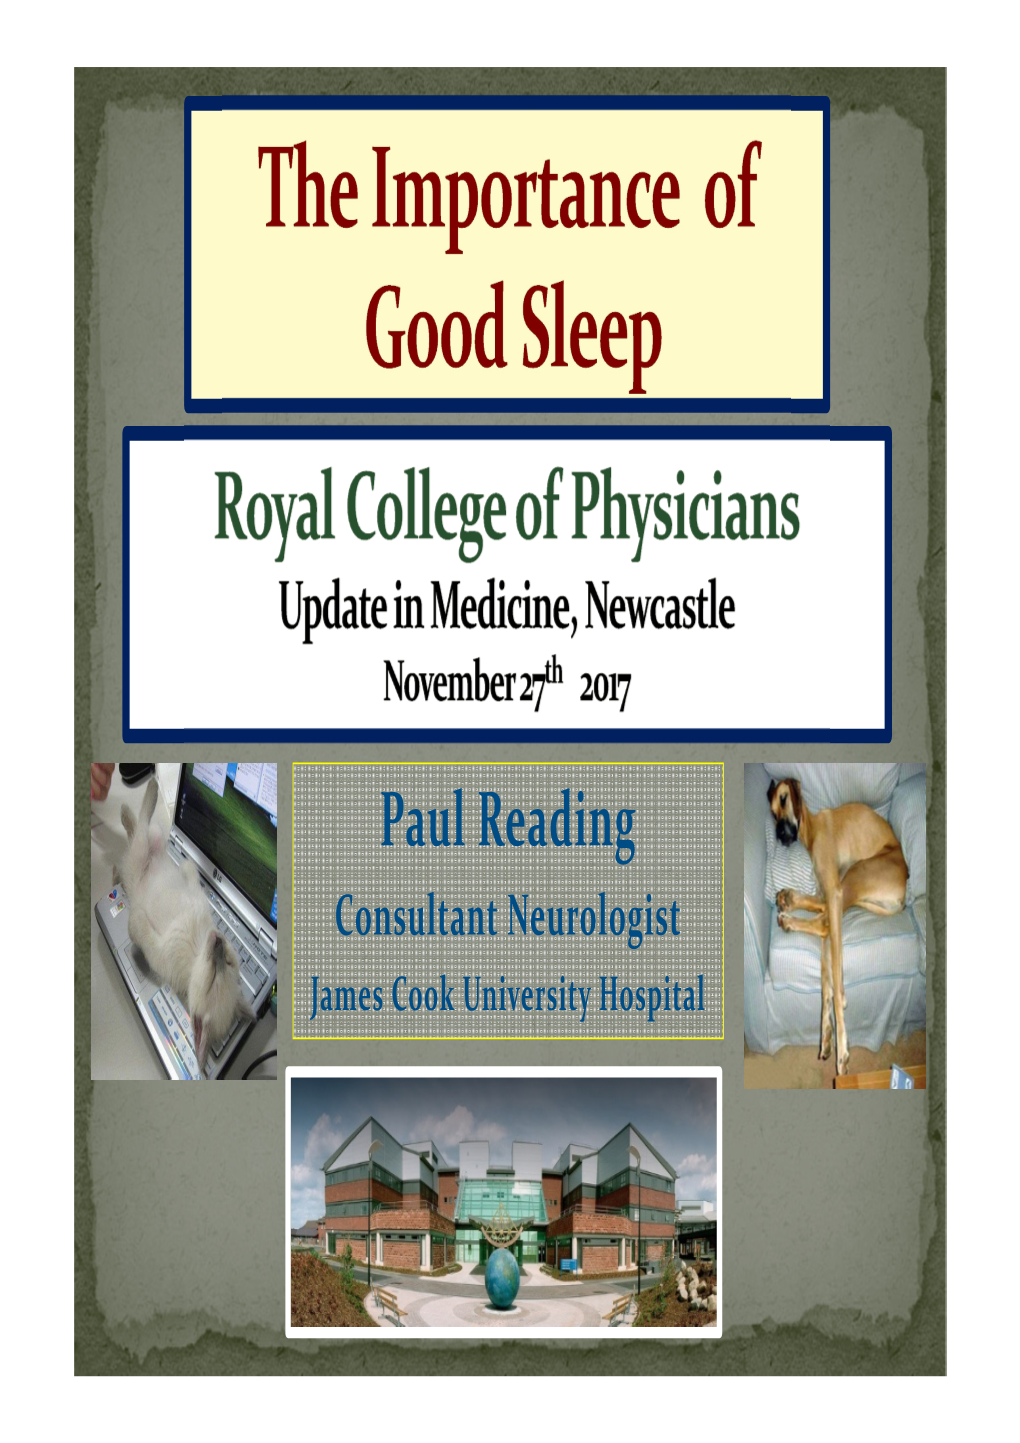 Paul Reading Consultant Neurologist James Cook University Hospital Journal of the Canadian Medical Association, 2006 ∑ I